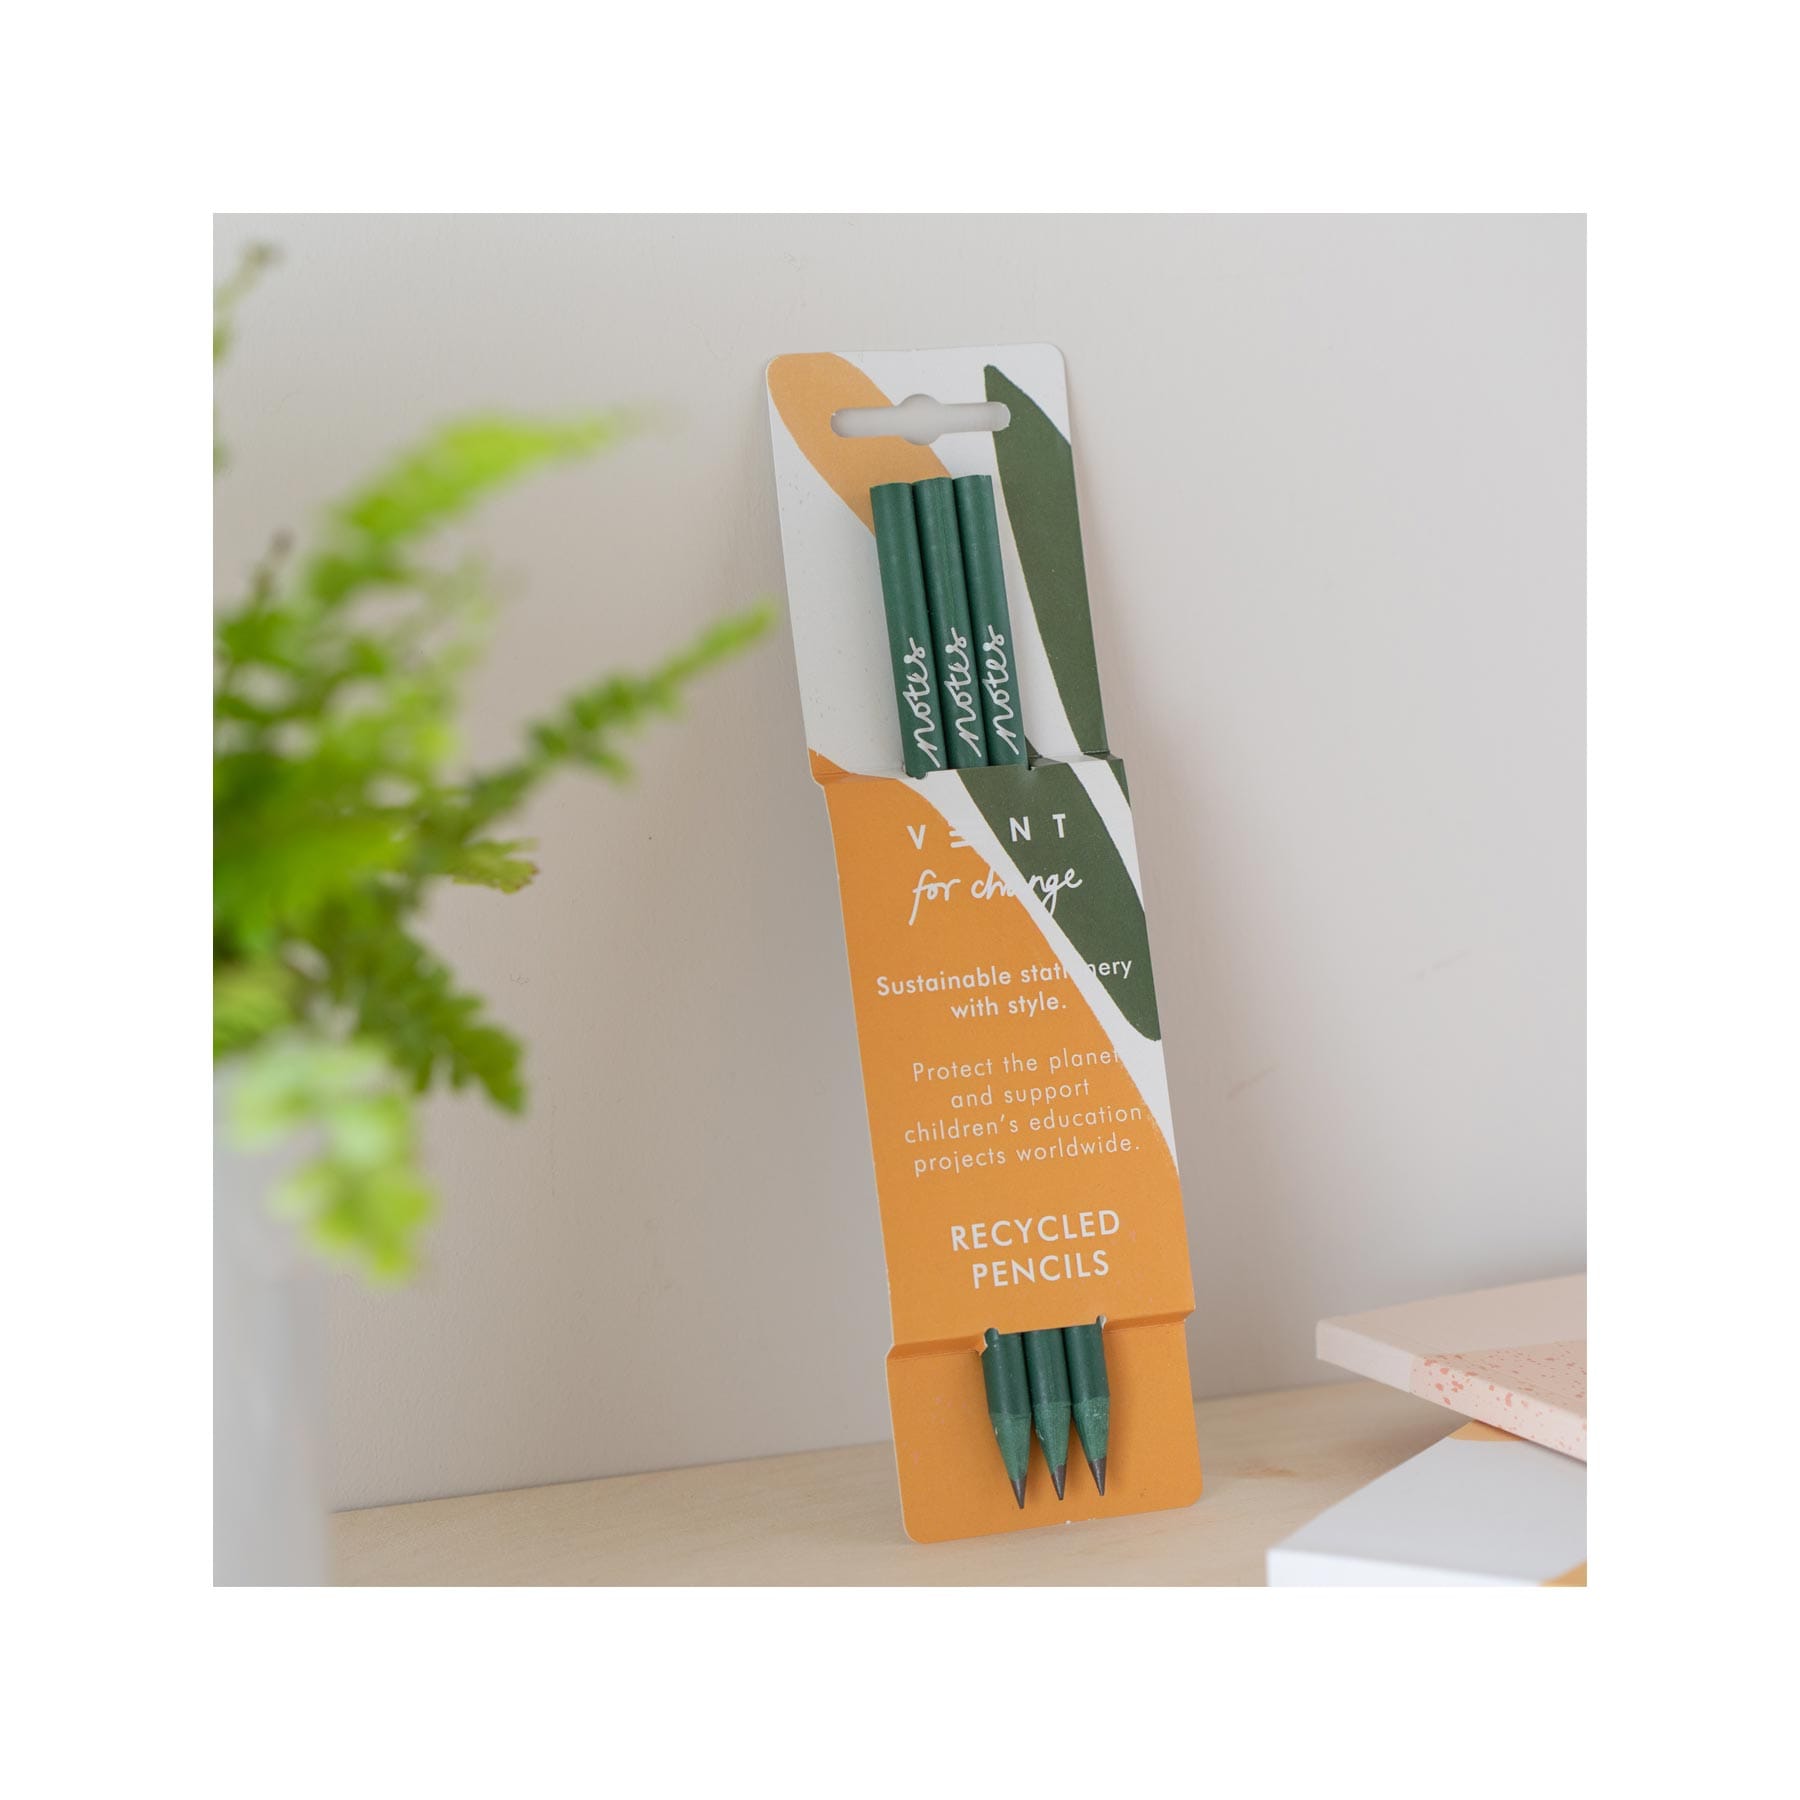 Recycled pencils - olive